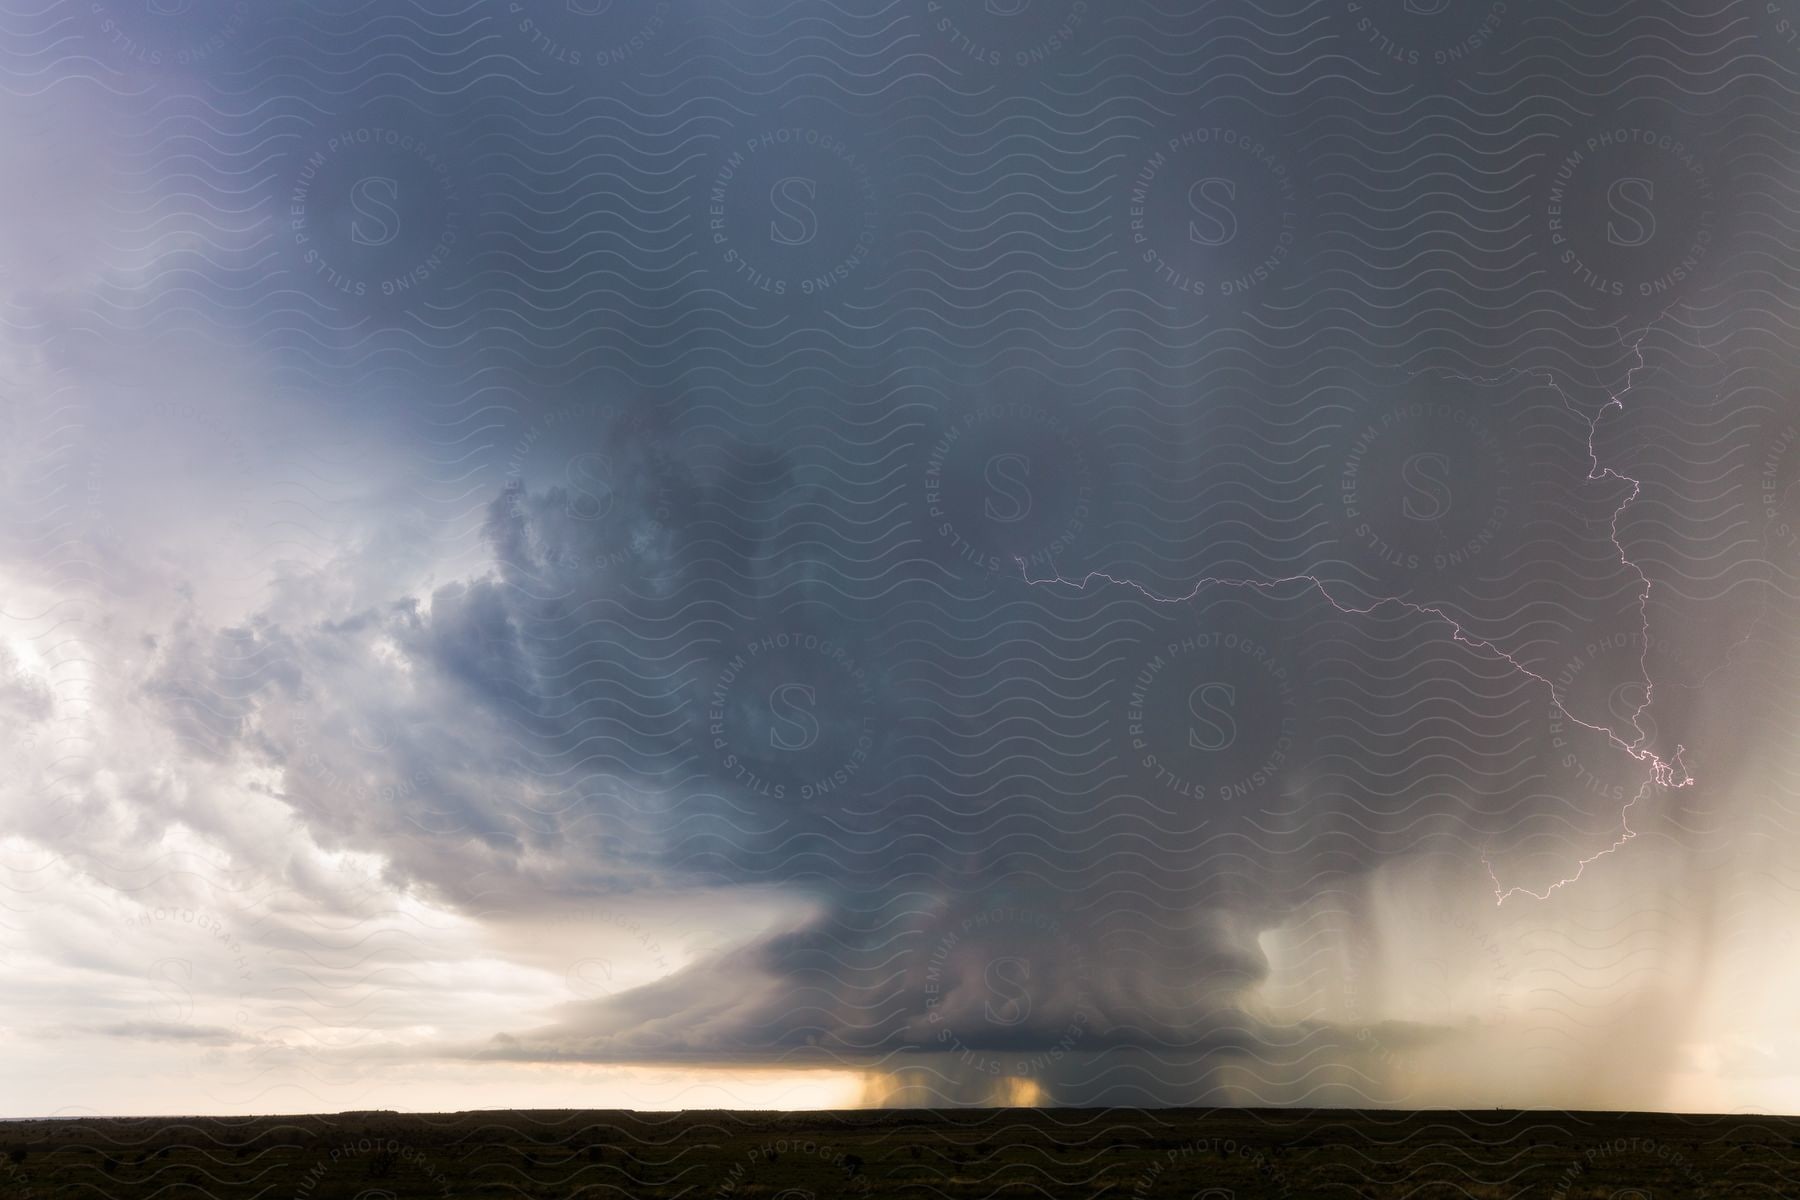 A large storm with thunder and wind is brewing on the horizon in the central plains of the united states